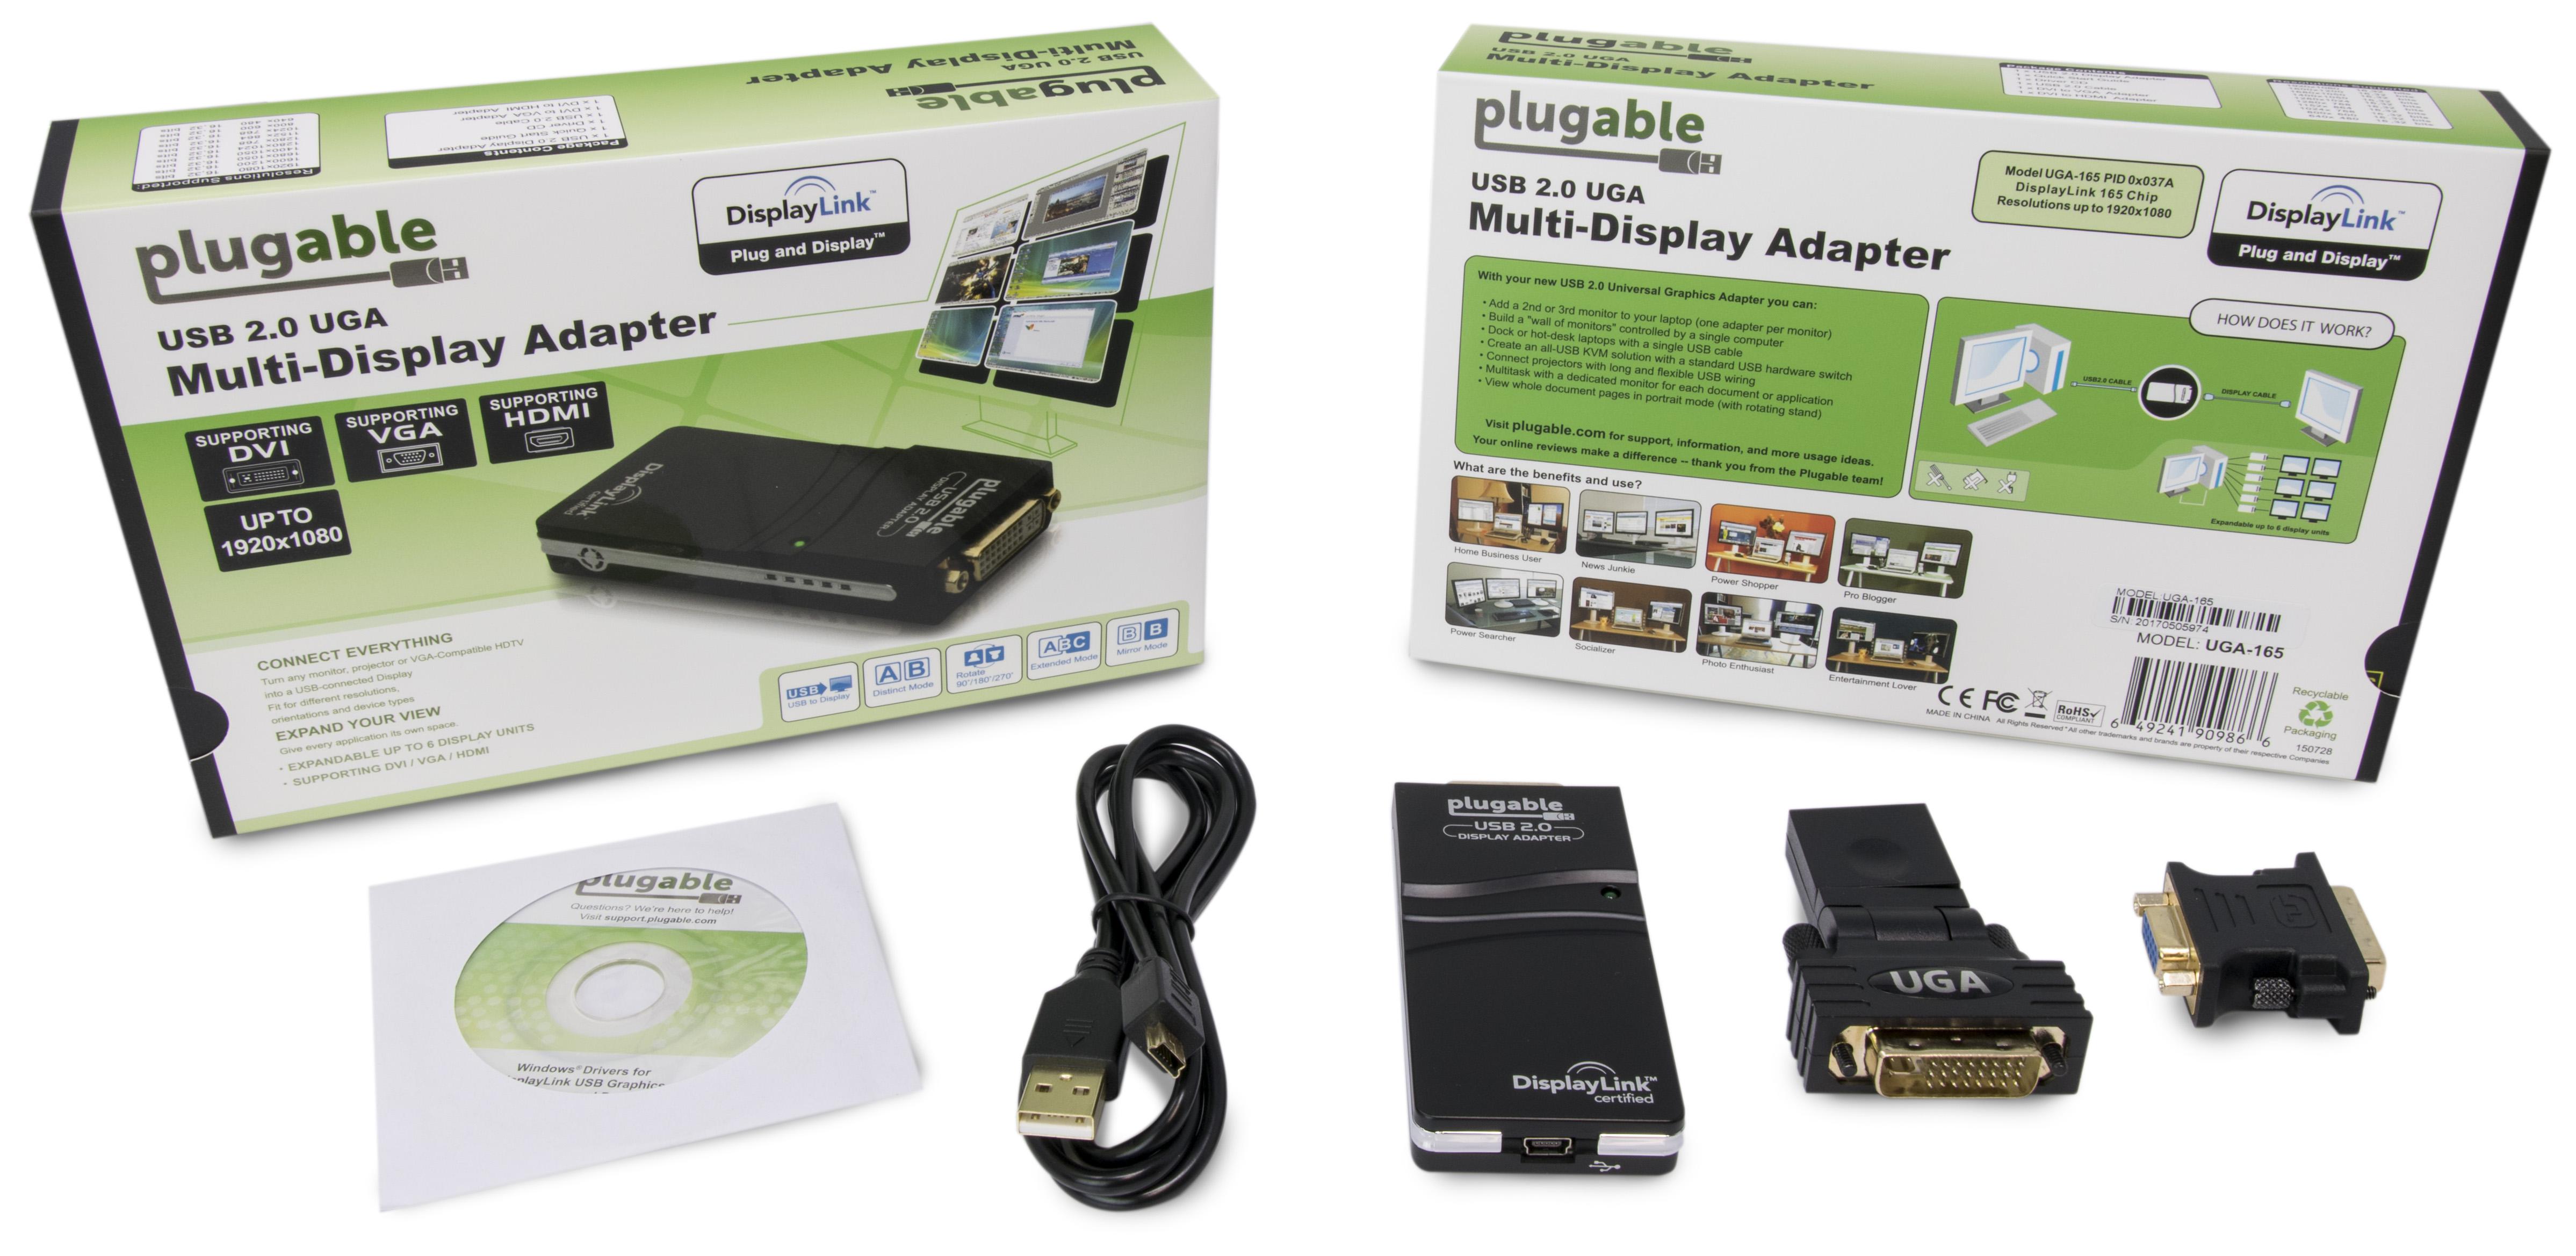 Plugable USB 2.0 to DVI/VGA/HDMI Video Graphics Adapter for Multiple Monitors up to 1920x1080 Supports Windows 10, 8.1, 7, XP, and Mac 10.14+ - image 4 of 5